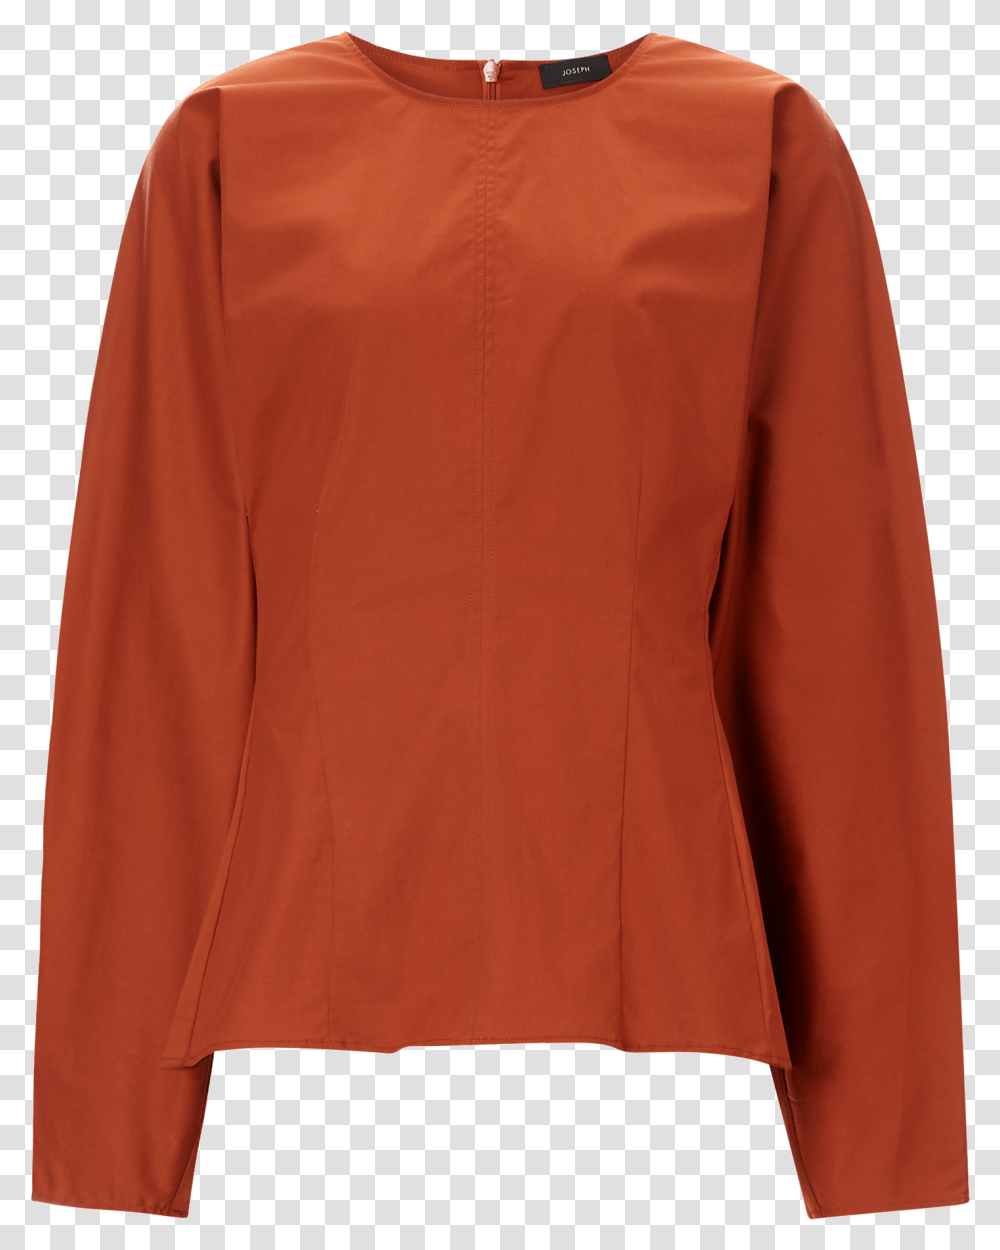 Joseph Cass Cotton Stretch Blouse In Tan Blouse, Sleeve, Apparel, Long Sleeve Transparent Png